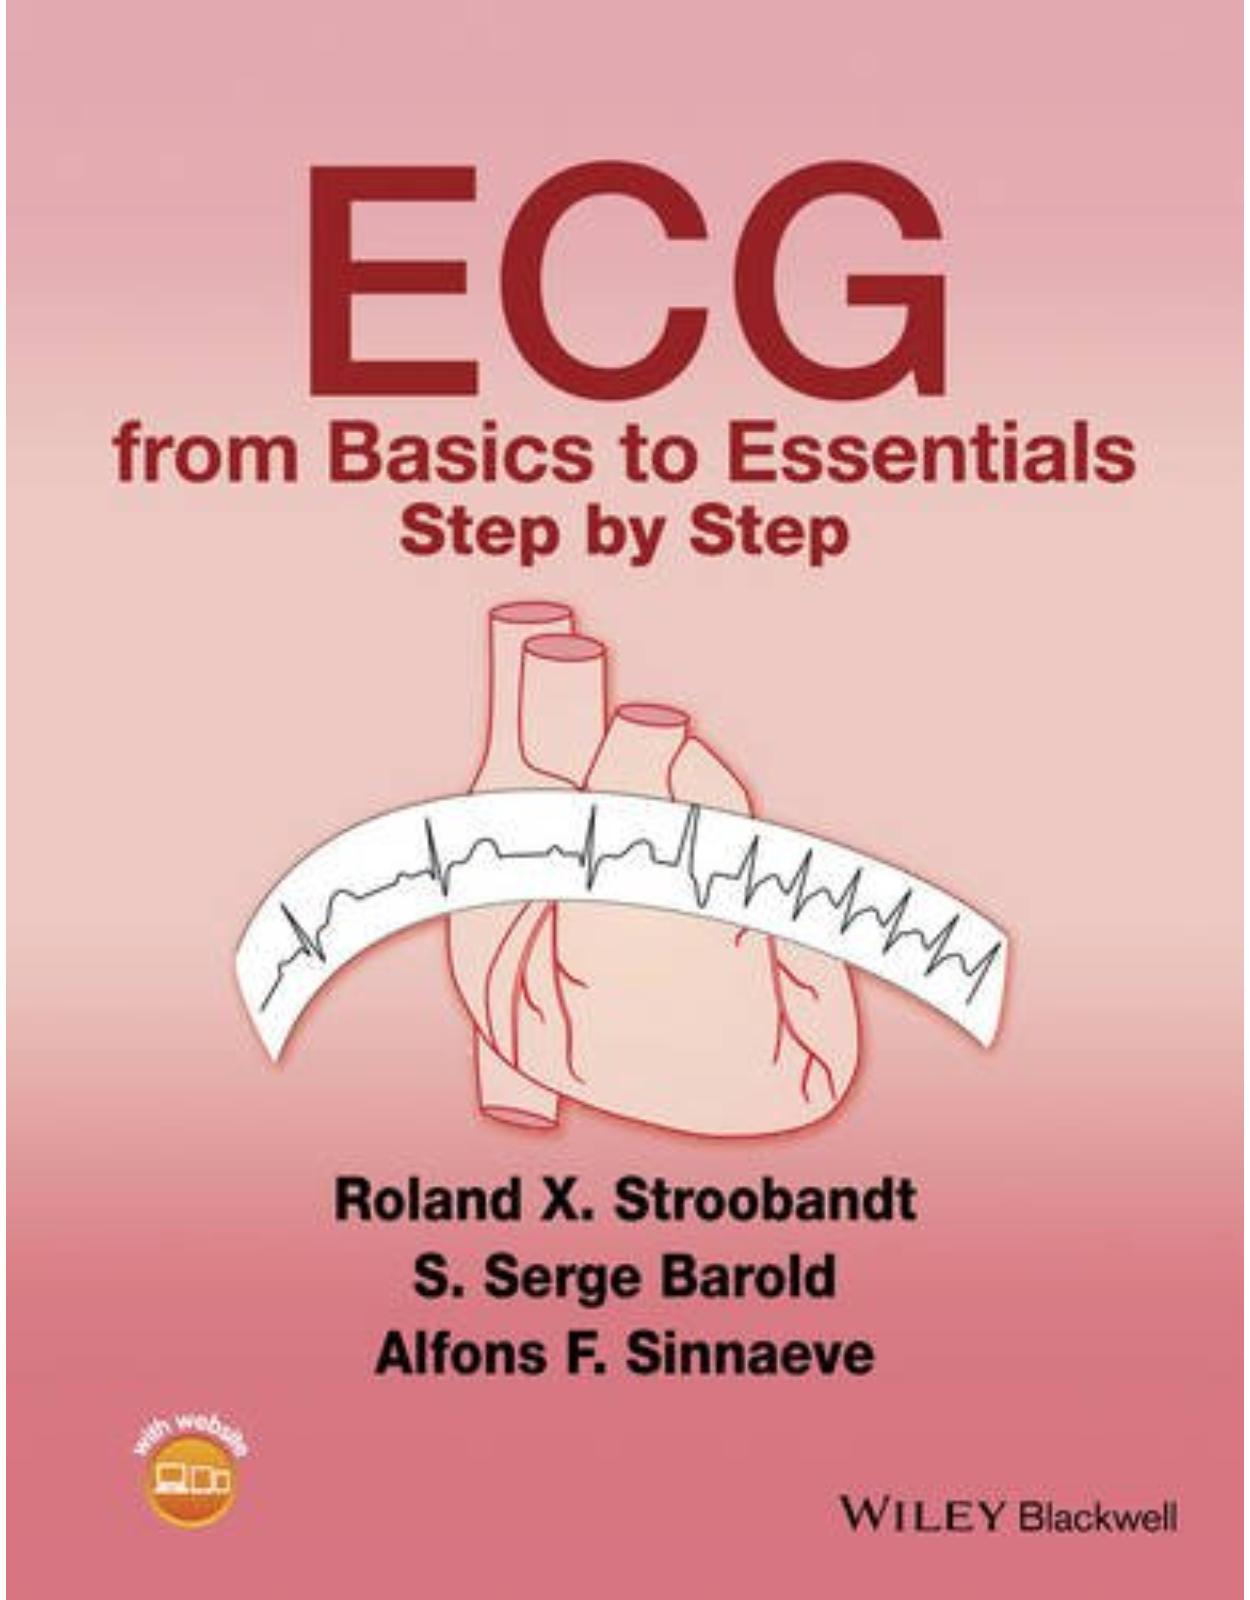 ECG from Basics to Essentials: Step by Step